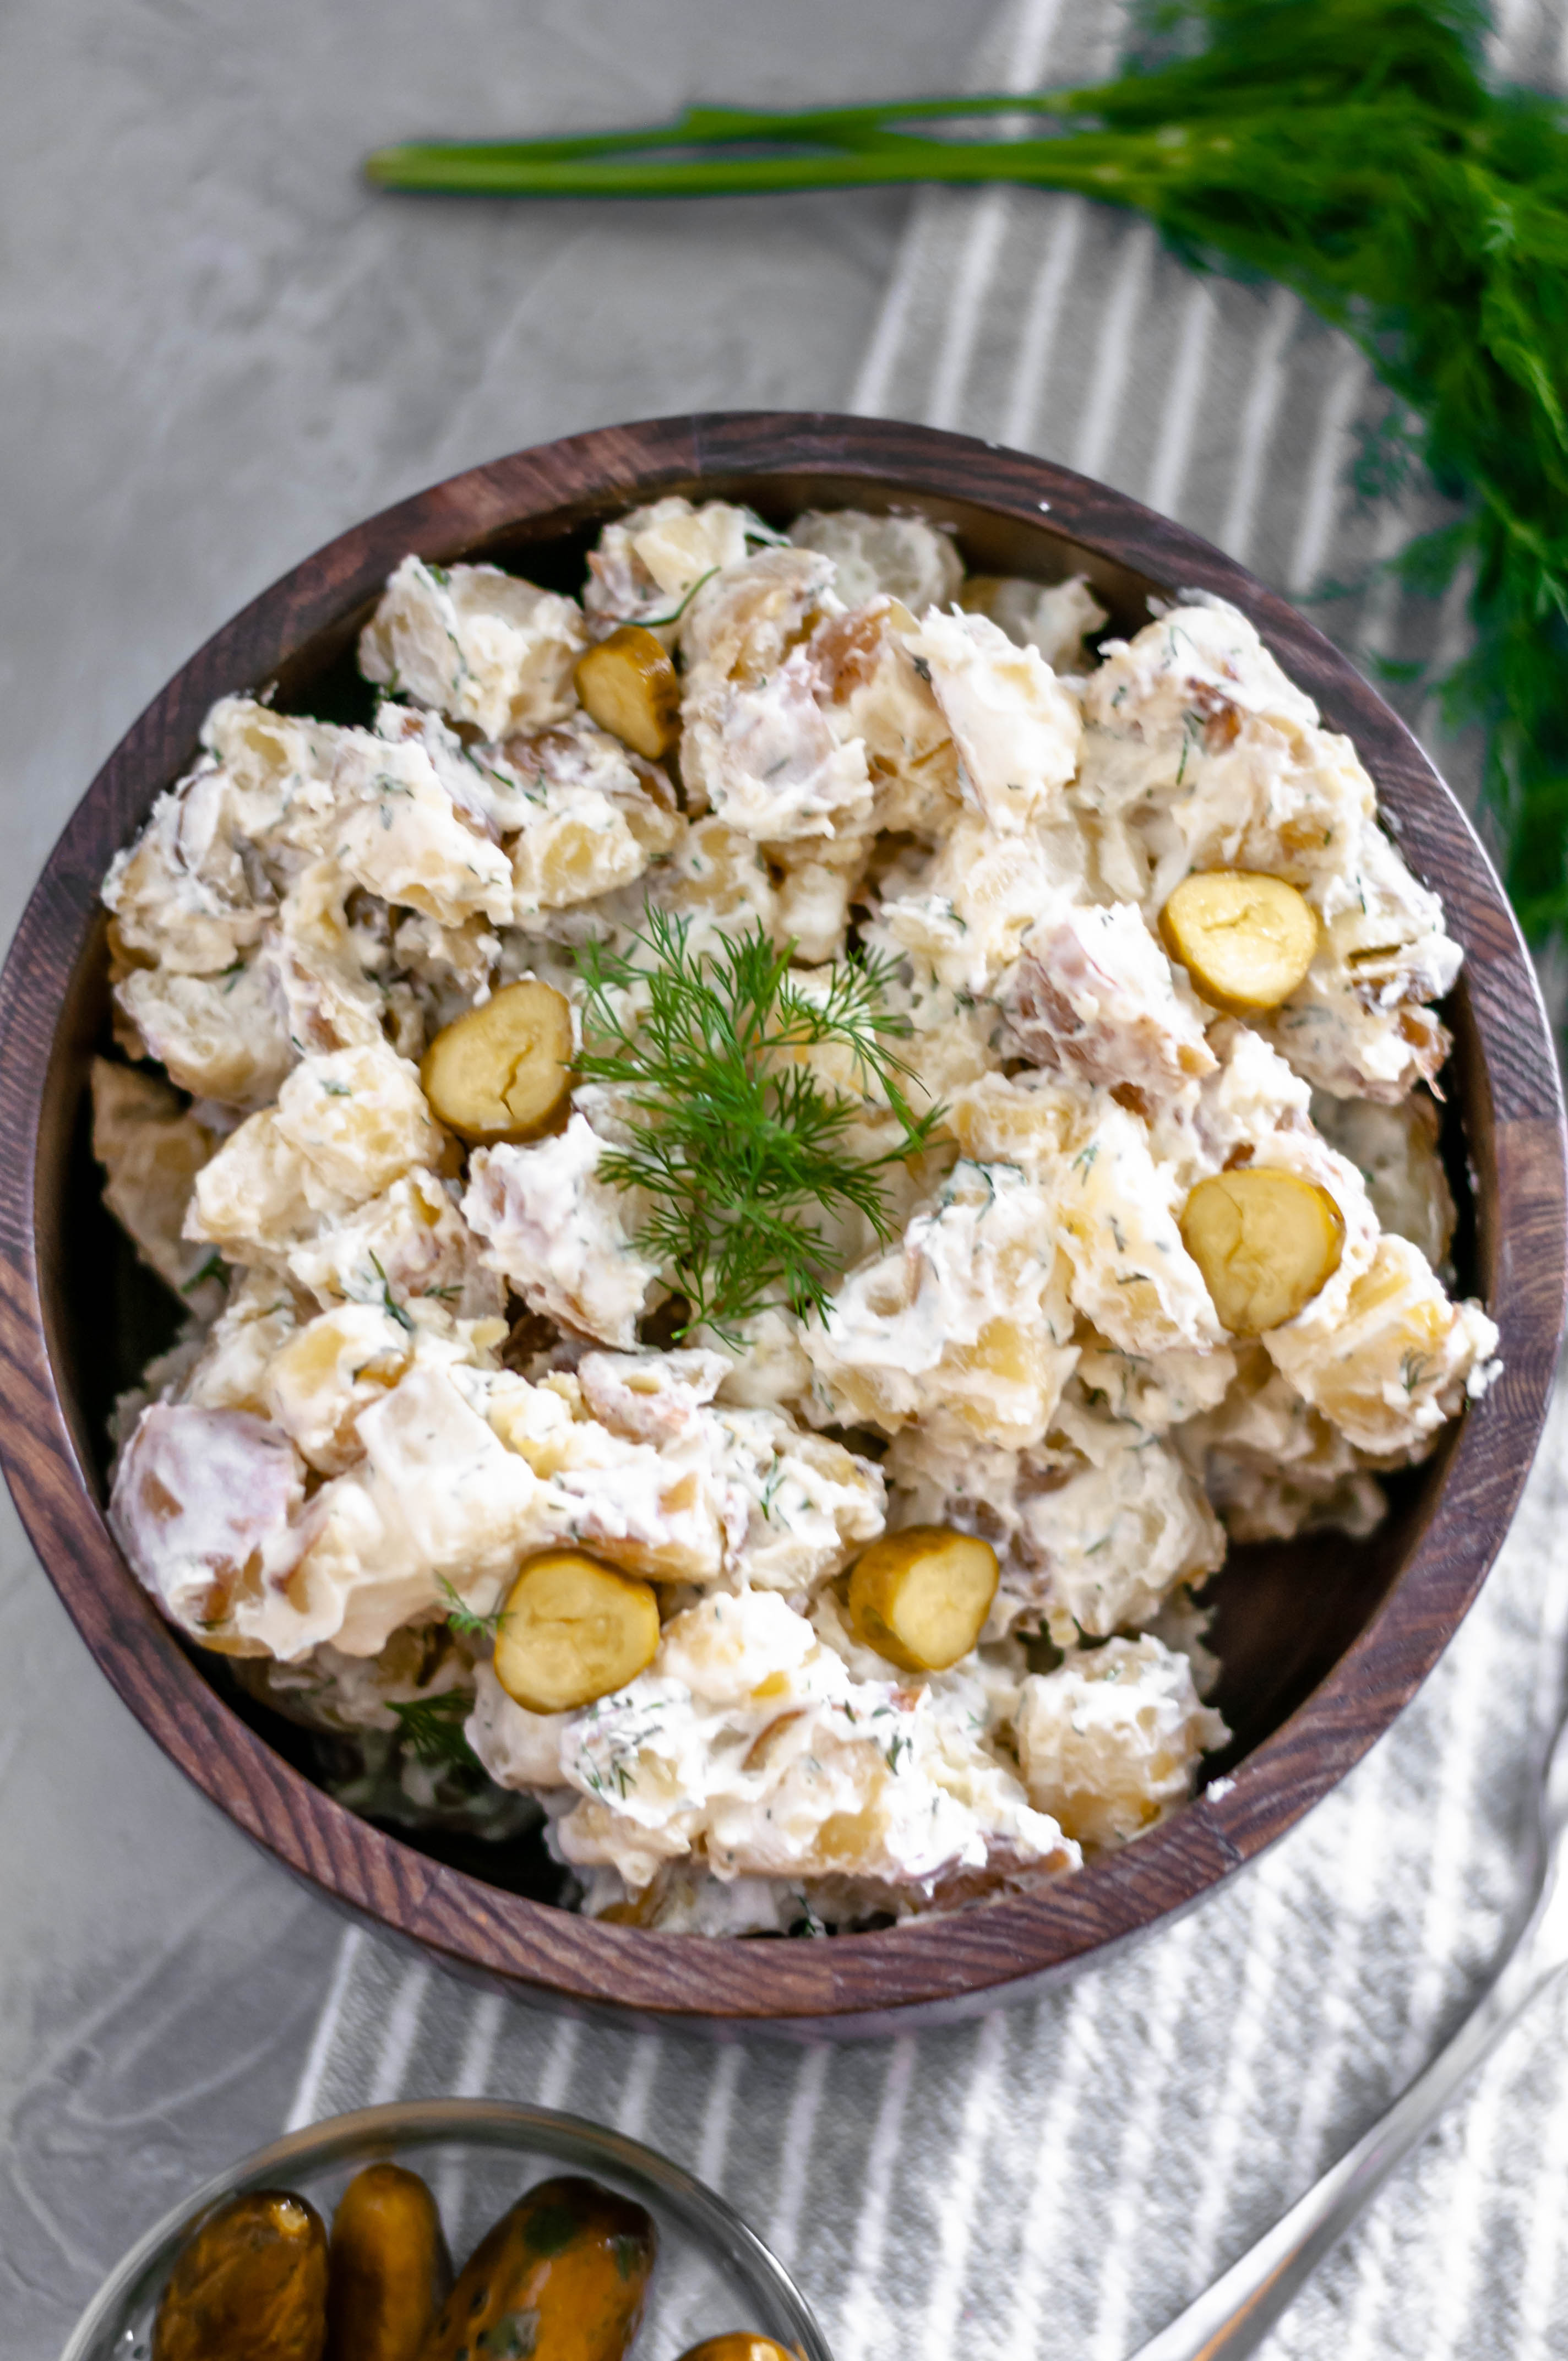 If you're a pickle lover, you need to try this Pickle Potato Salad ASAP. Tender potatoes, crunchy pickles and a creamy dill sauce.